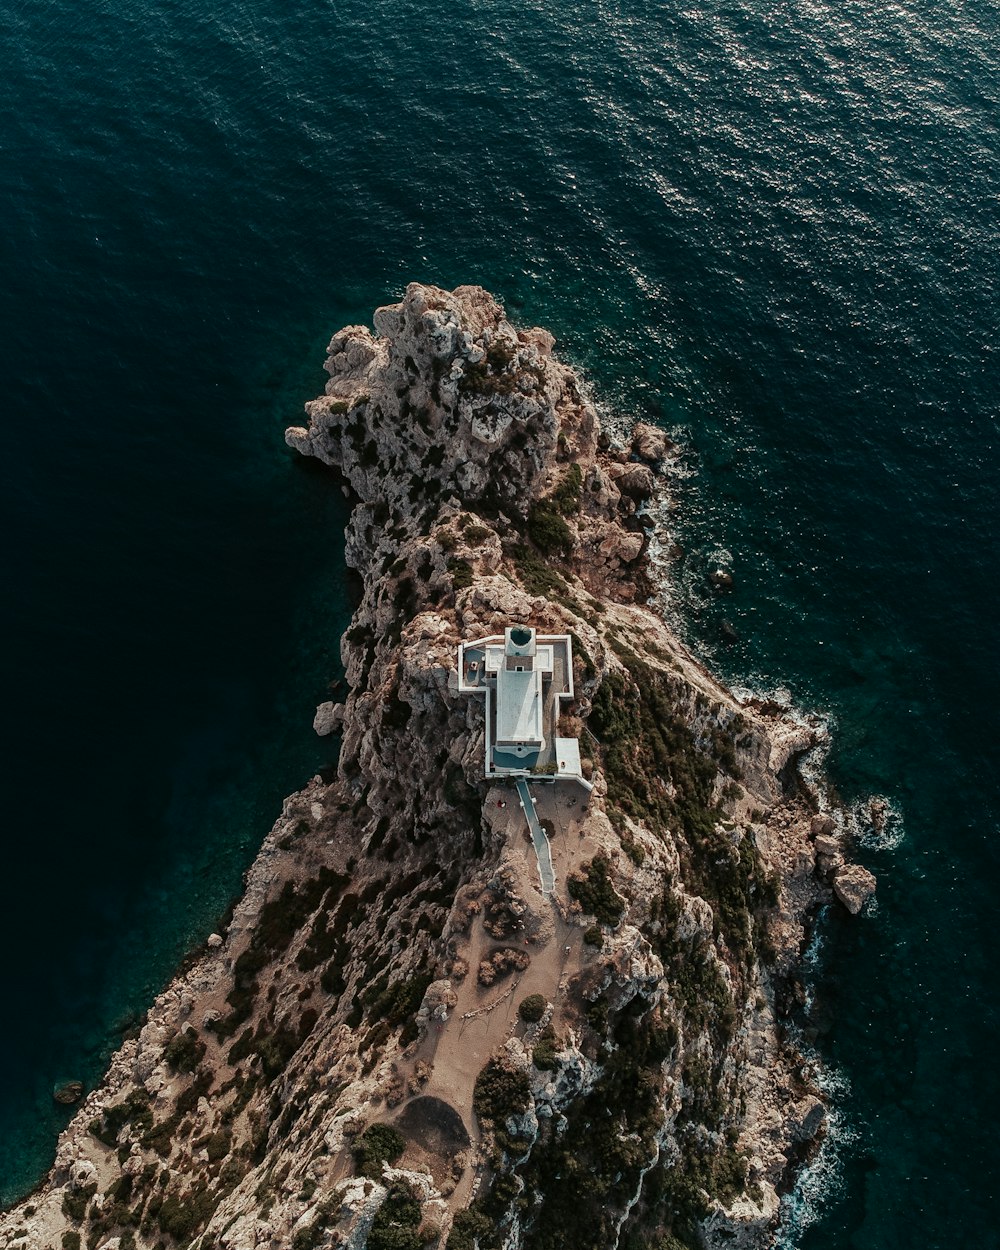 an aerial view of a house on a rocky island in the middle of the ocean